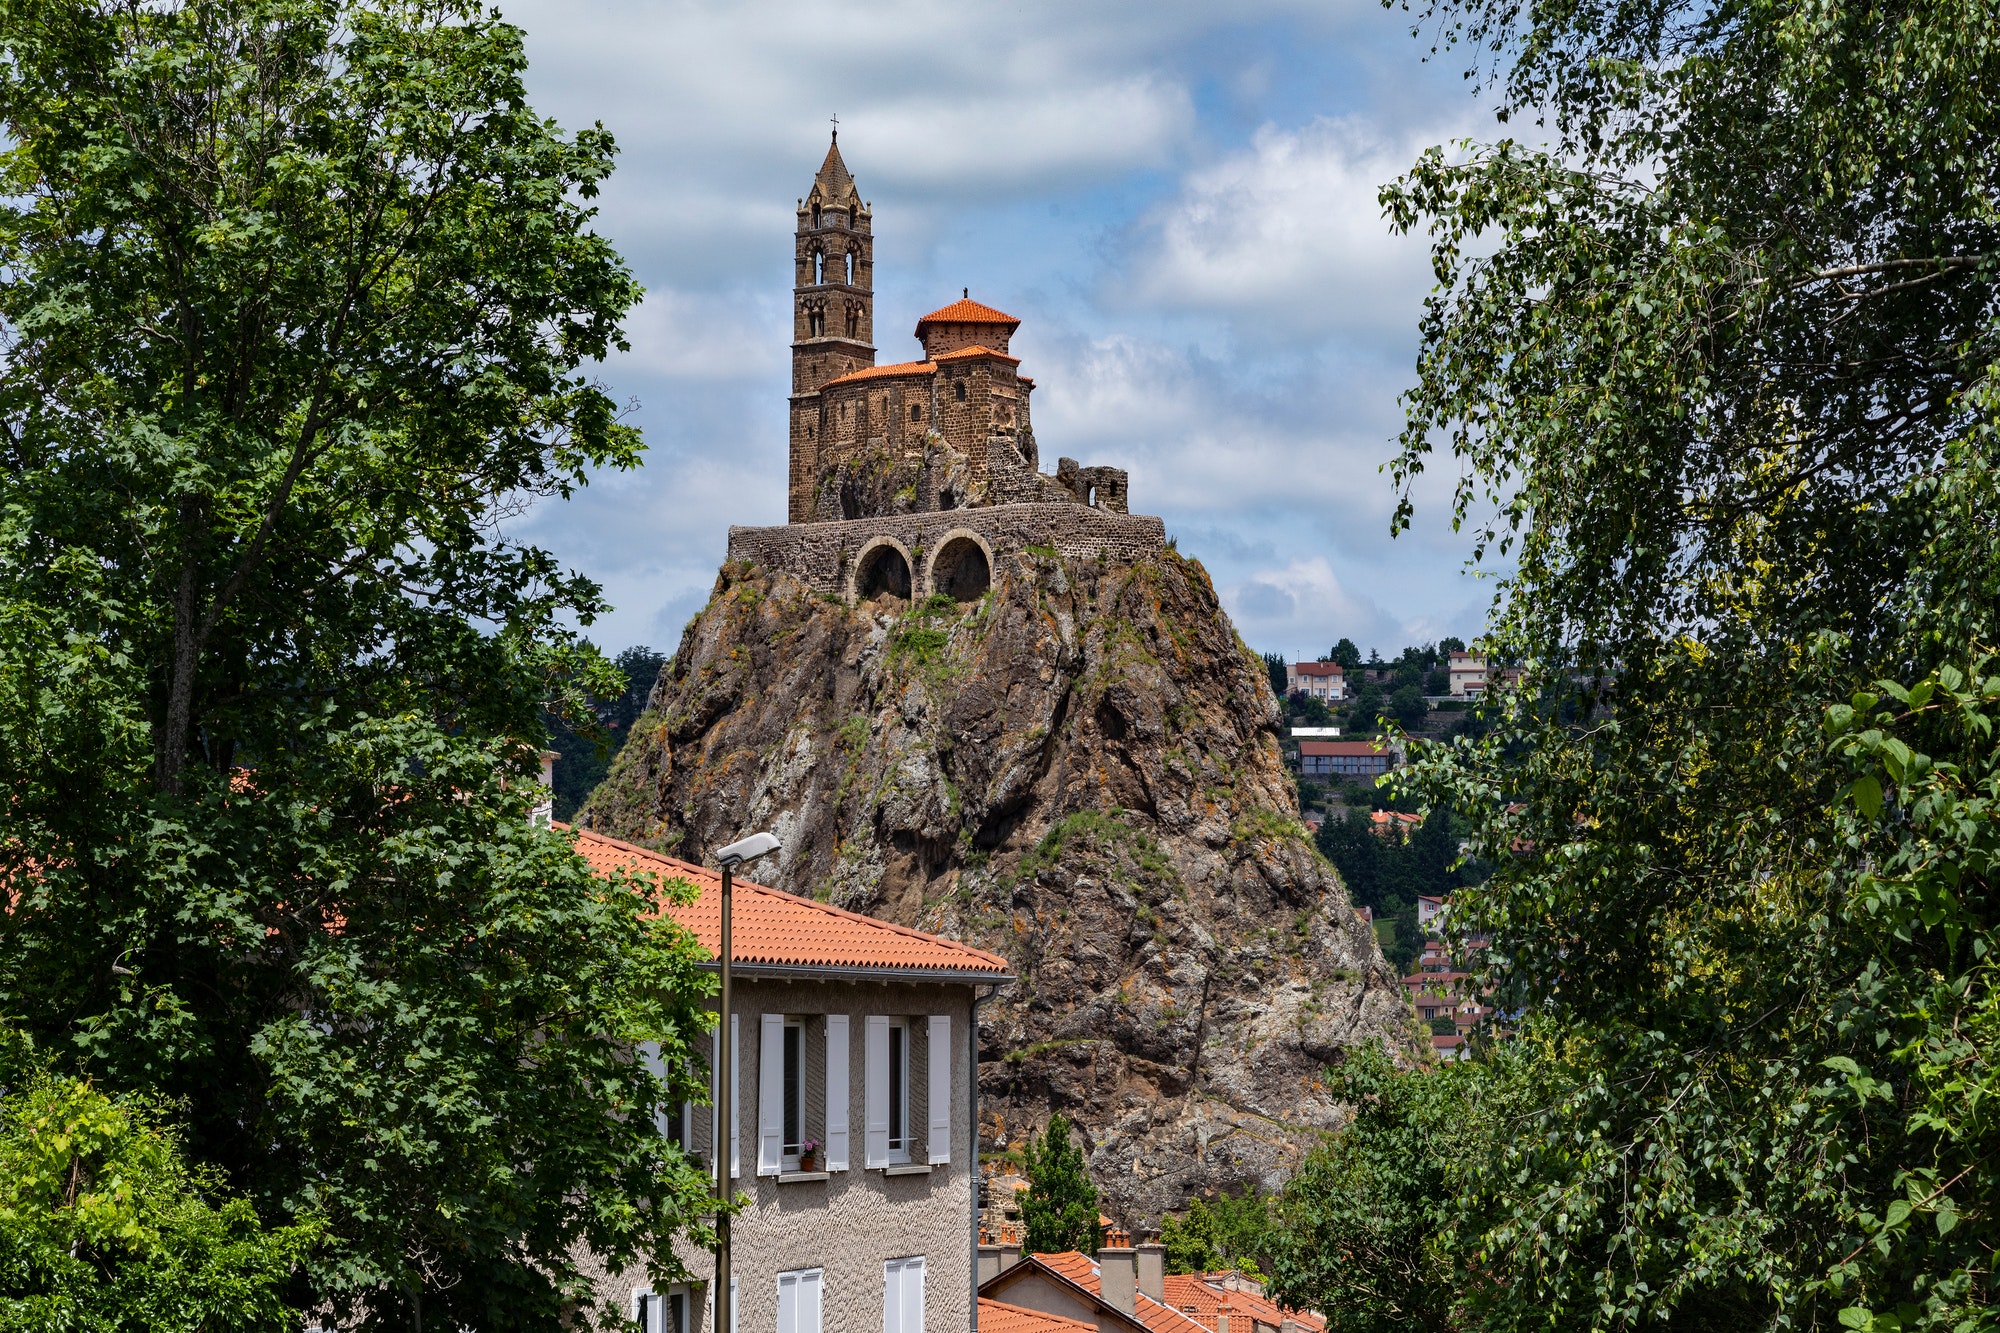 The Chapel of St Michel-dAiguilhe in the city of Le Puy-en-Velay in the Auvergne-Rhone-Alpes region